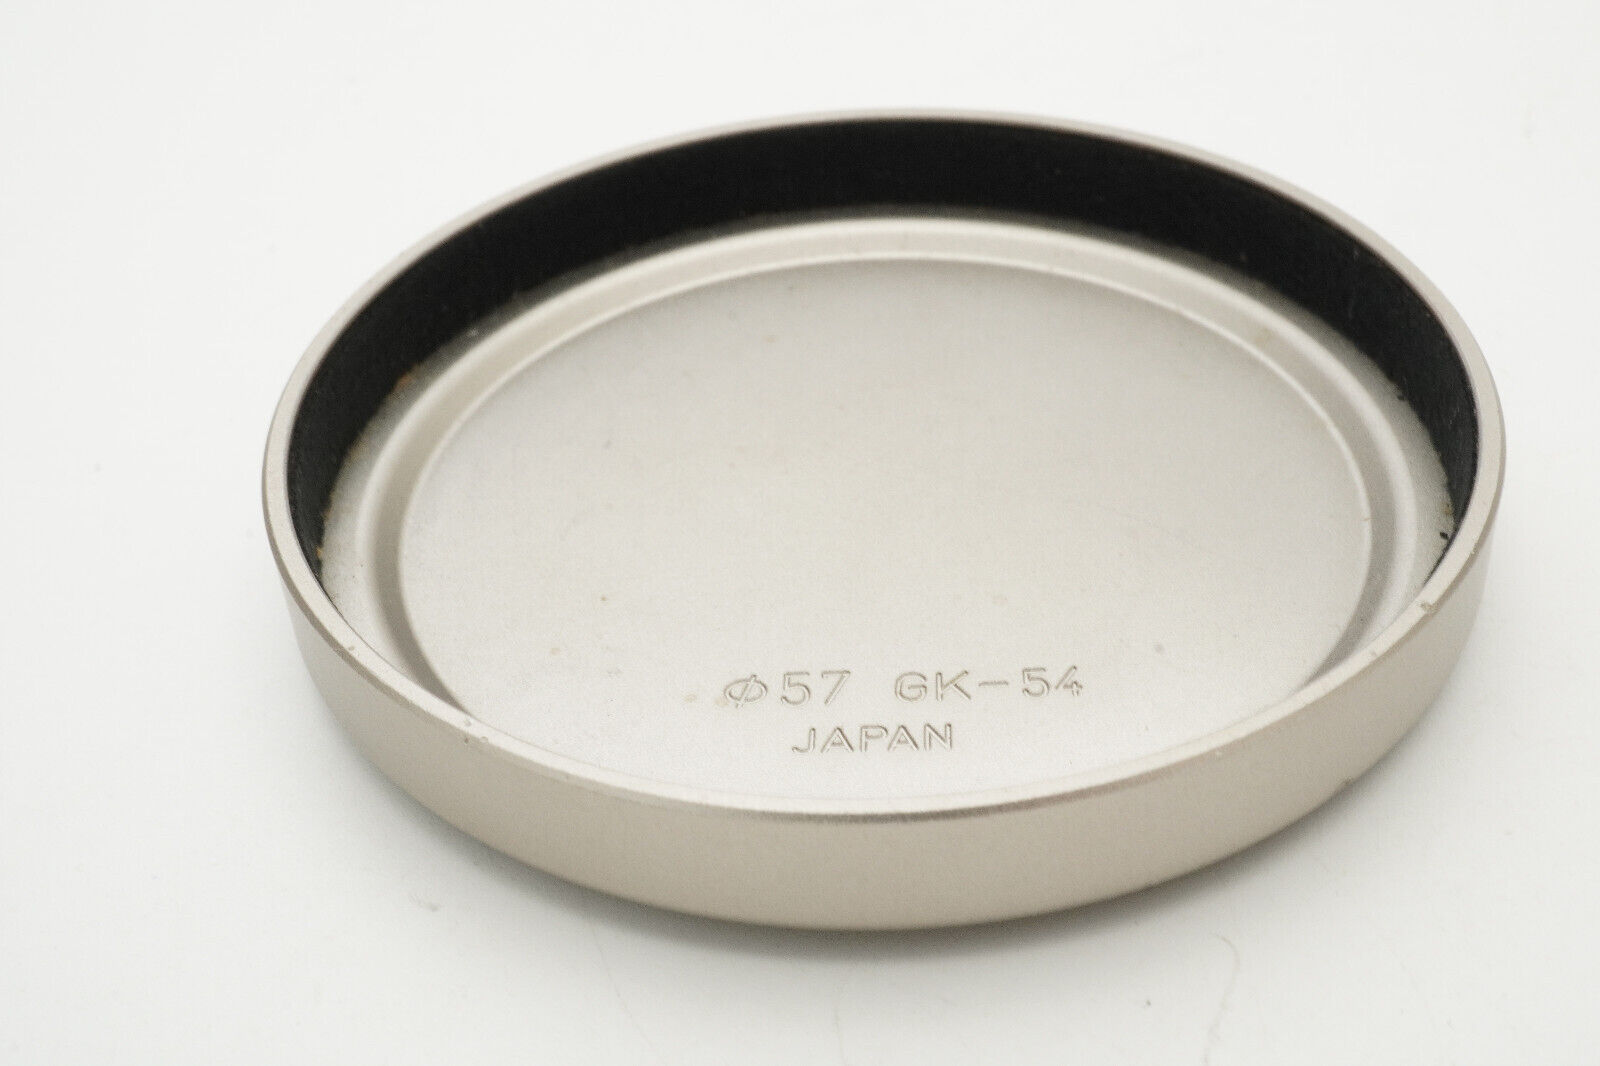 Contax GK-54 Front Lens Cap for G2 GG-1 GG-2 GG-3 From Japan #B108 